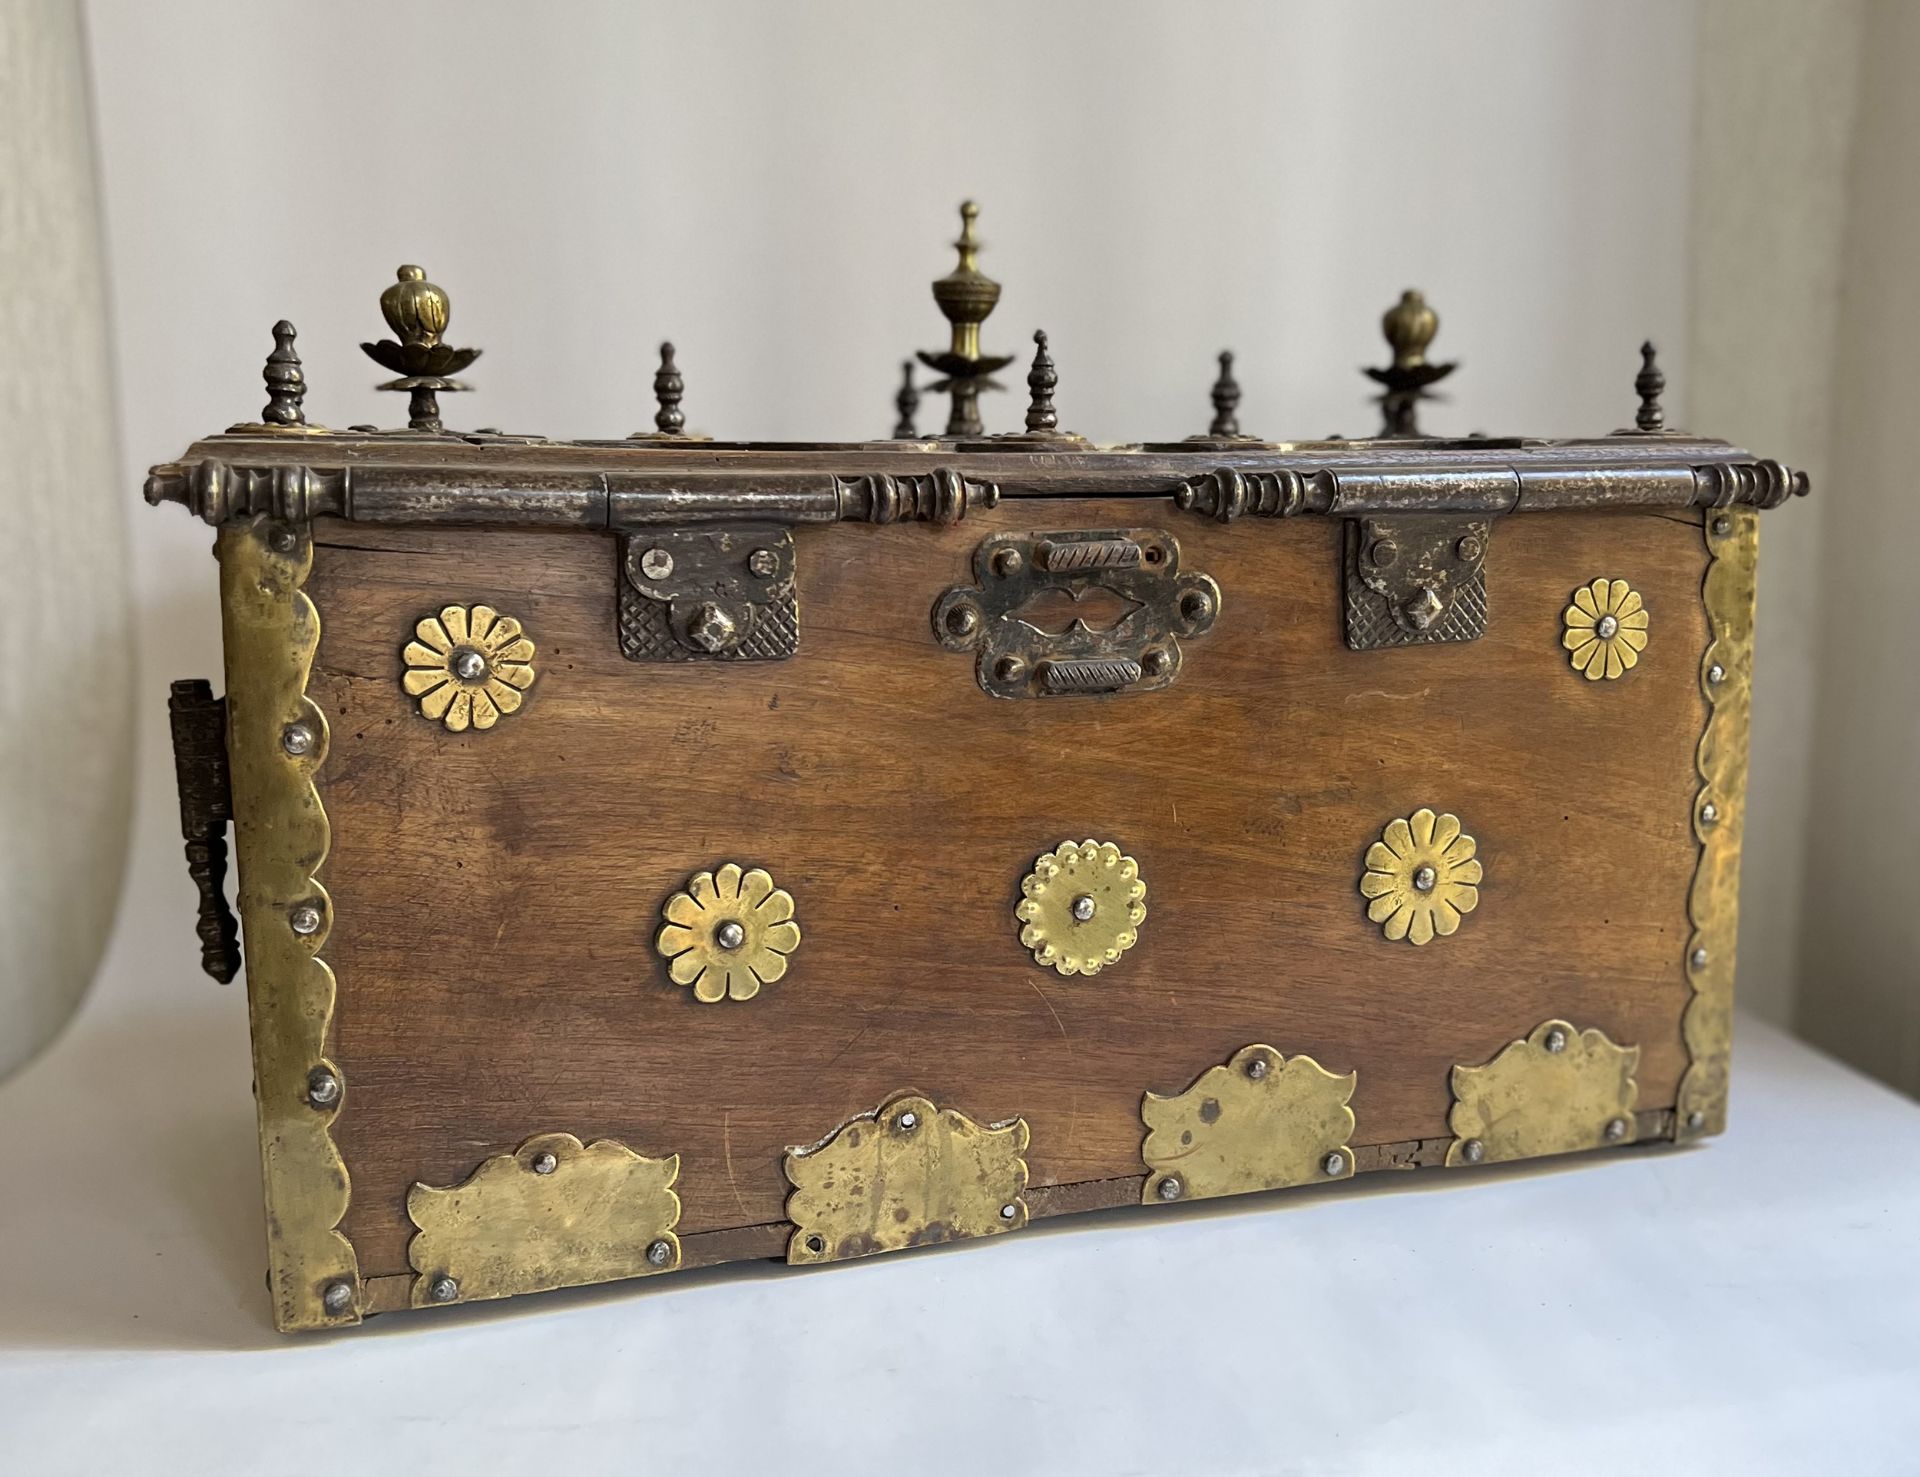 Rare Indian Colonial chest in teak and Bronze Pavilion appliqués, Gujarat, 18th century - Image 8 of 8